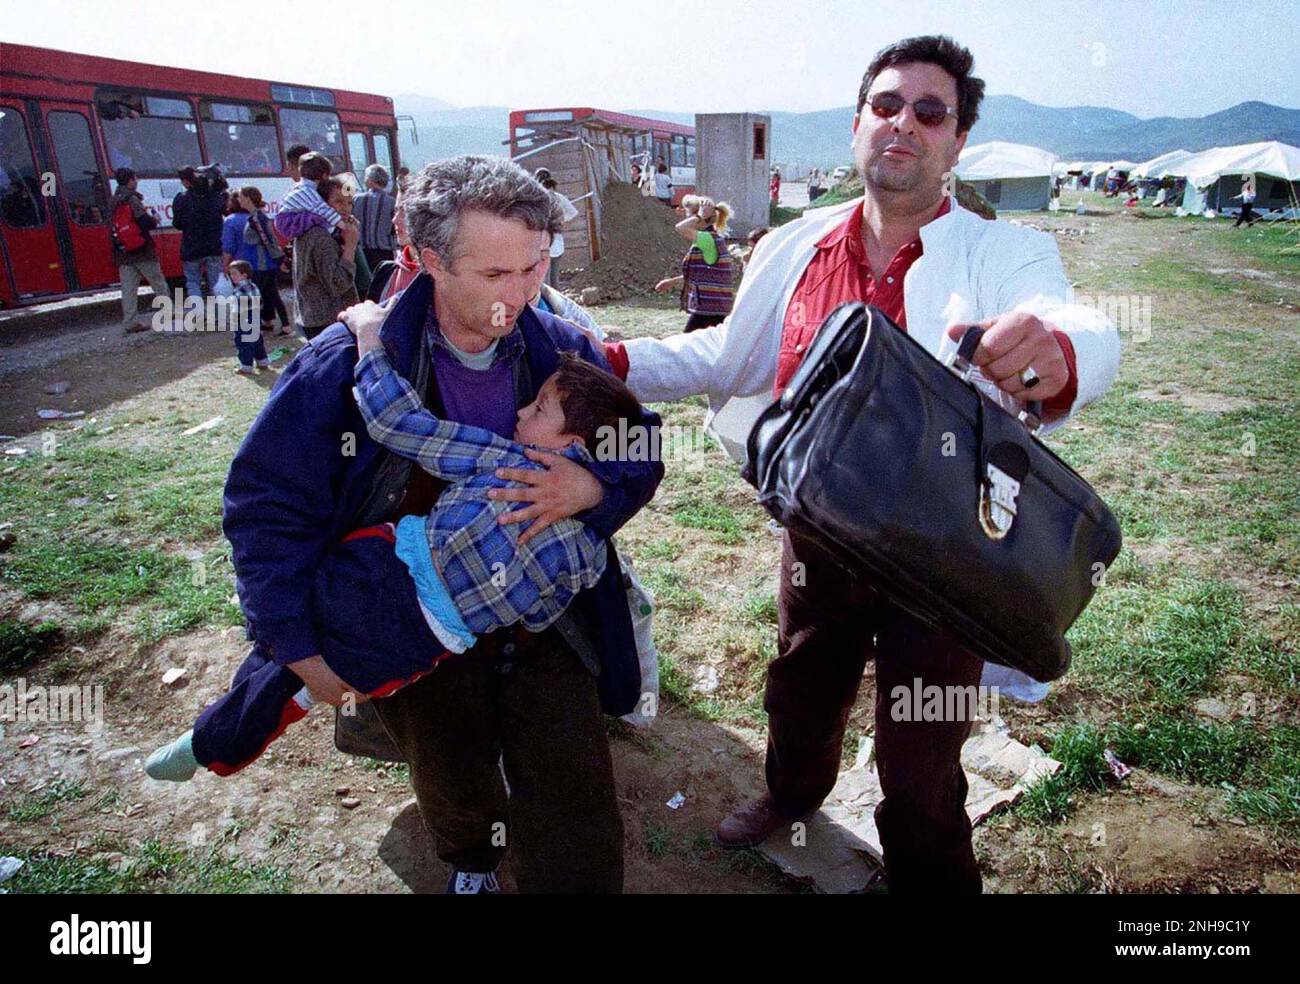 Man runs with child to seek medical help with doctor. Man and child had fled Kosovo due to ethnic cleansing and had arrived in Northern Macedonia via bus from the boarder crossing. Brazda refugee camp in Macedonia April 1999. The camp was run by NATO but  turned over  to UNHCR. Macedonia. Picture garyrobertsphotography.com Stock Photo